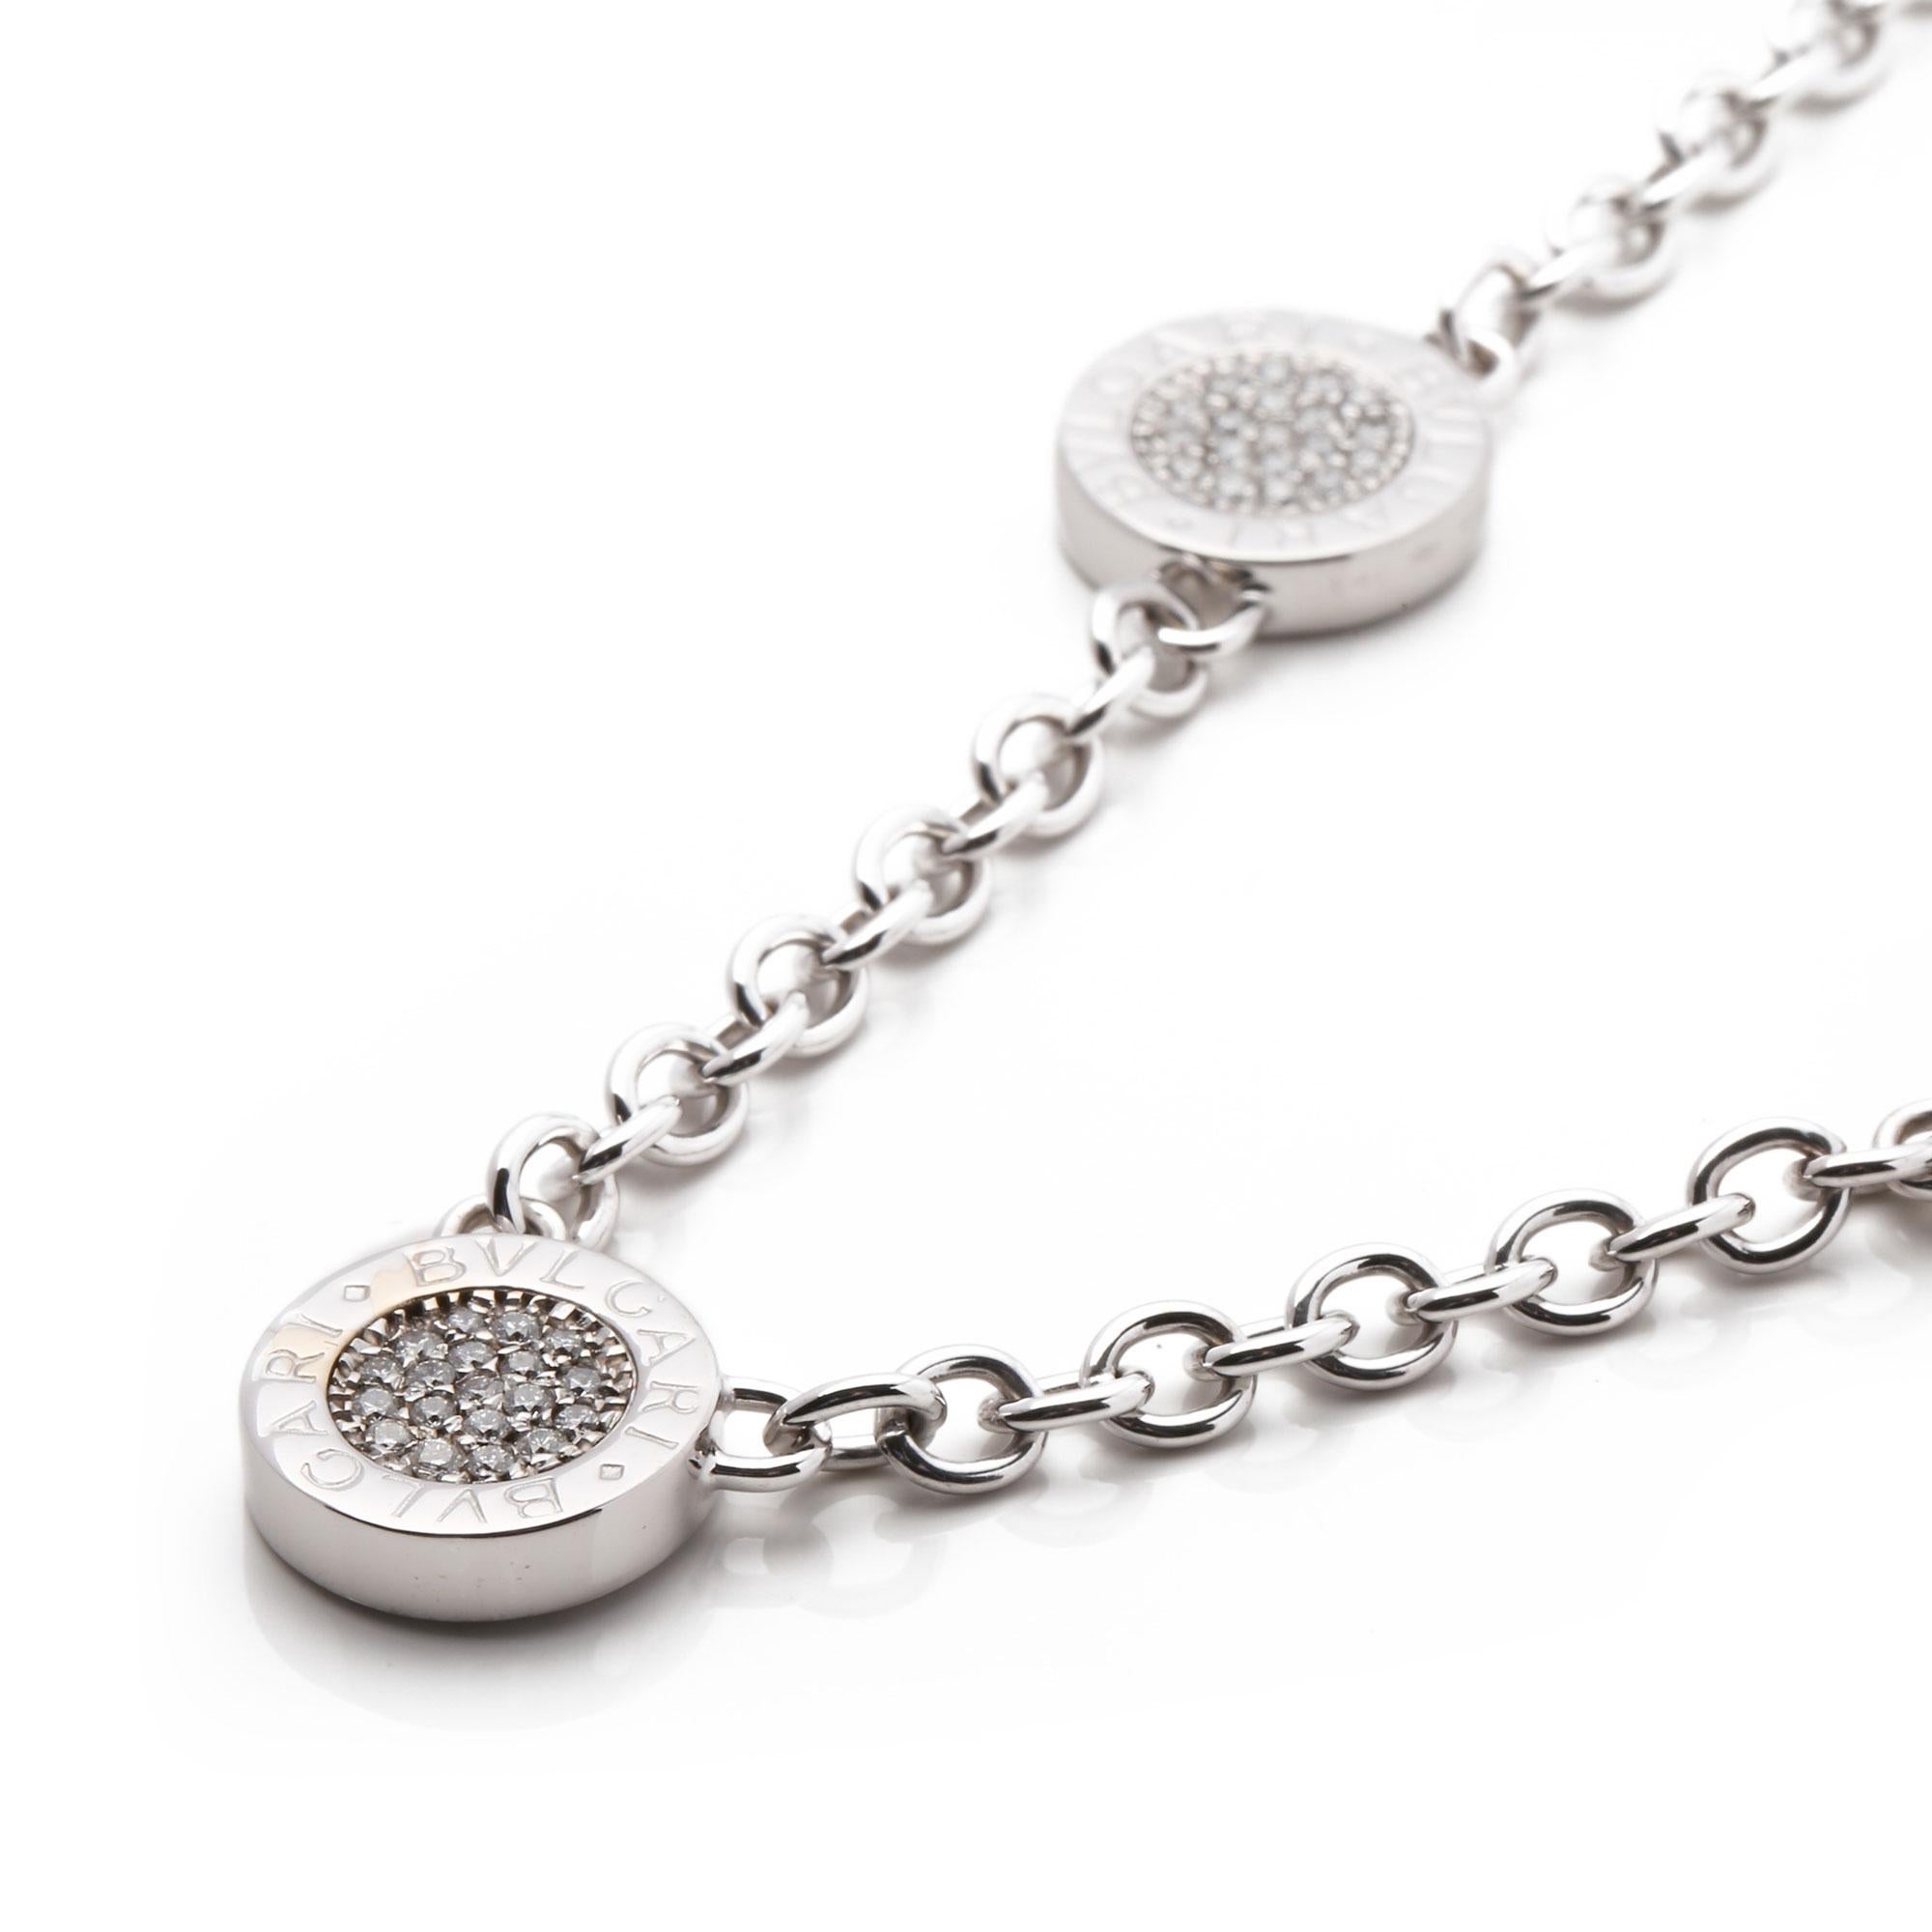 This necklace by Bulgari is from their Bulgari collection and features 60 round brilliant cut diamonds and onyx, made with a 40cm 18ct white gold chain. Accompanied with it's original Bulgari box. Our Xupes reference is J690 should you need to quote